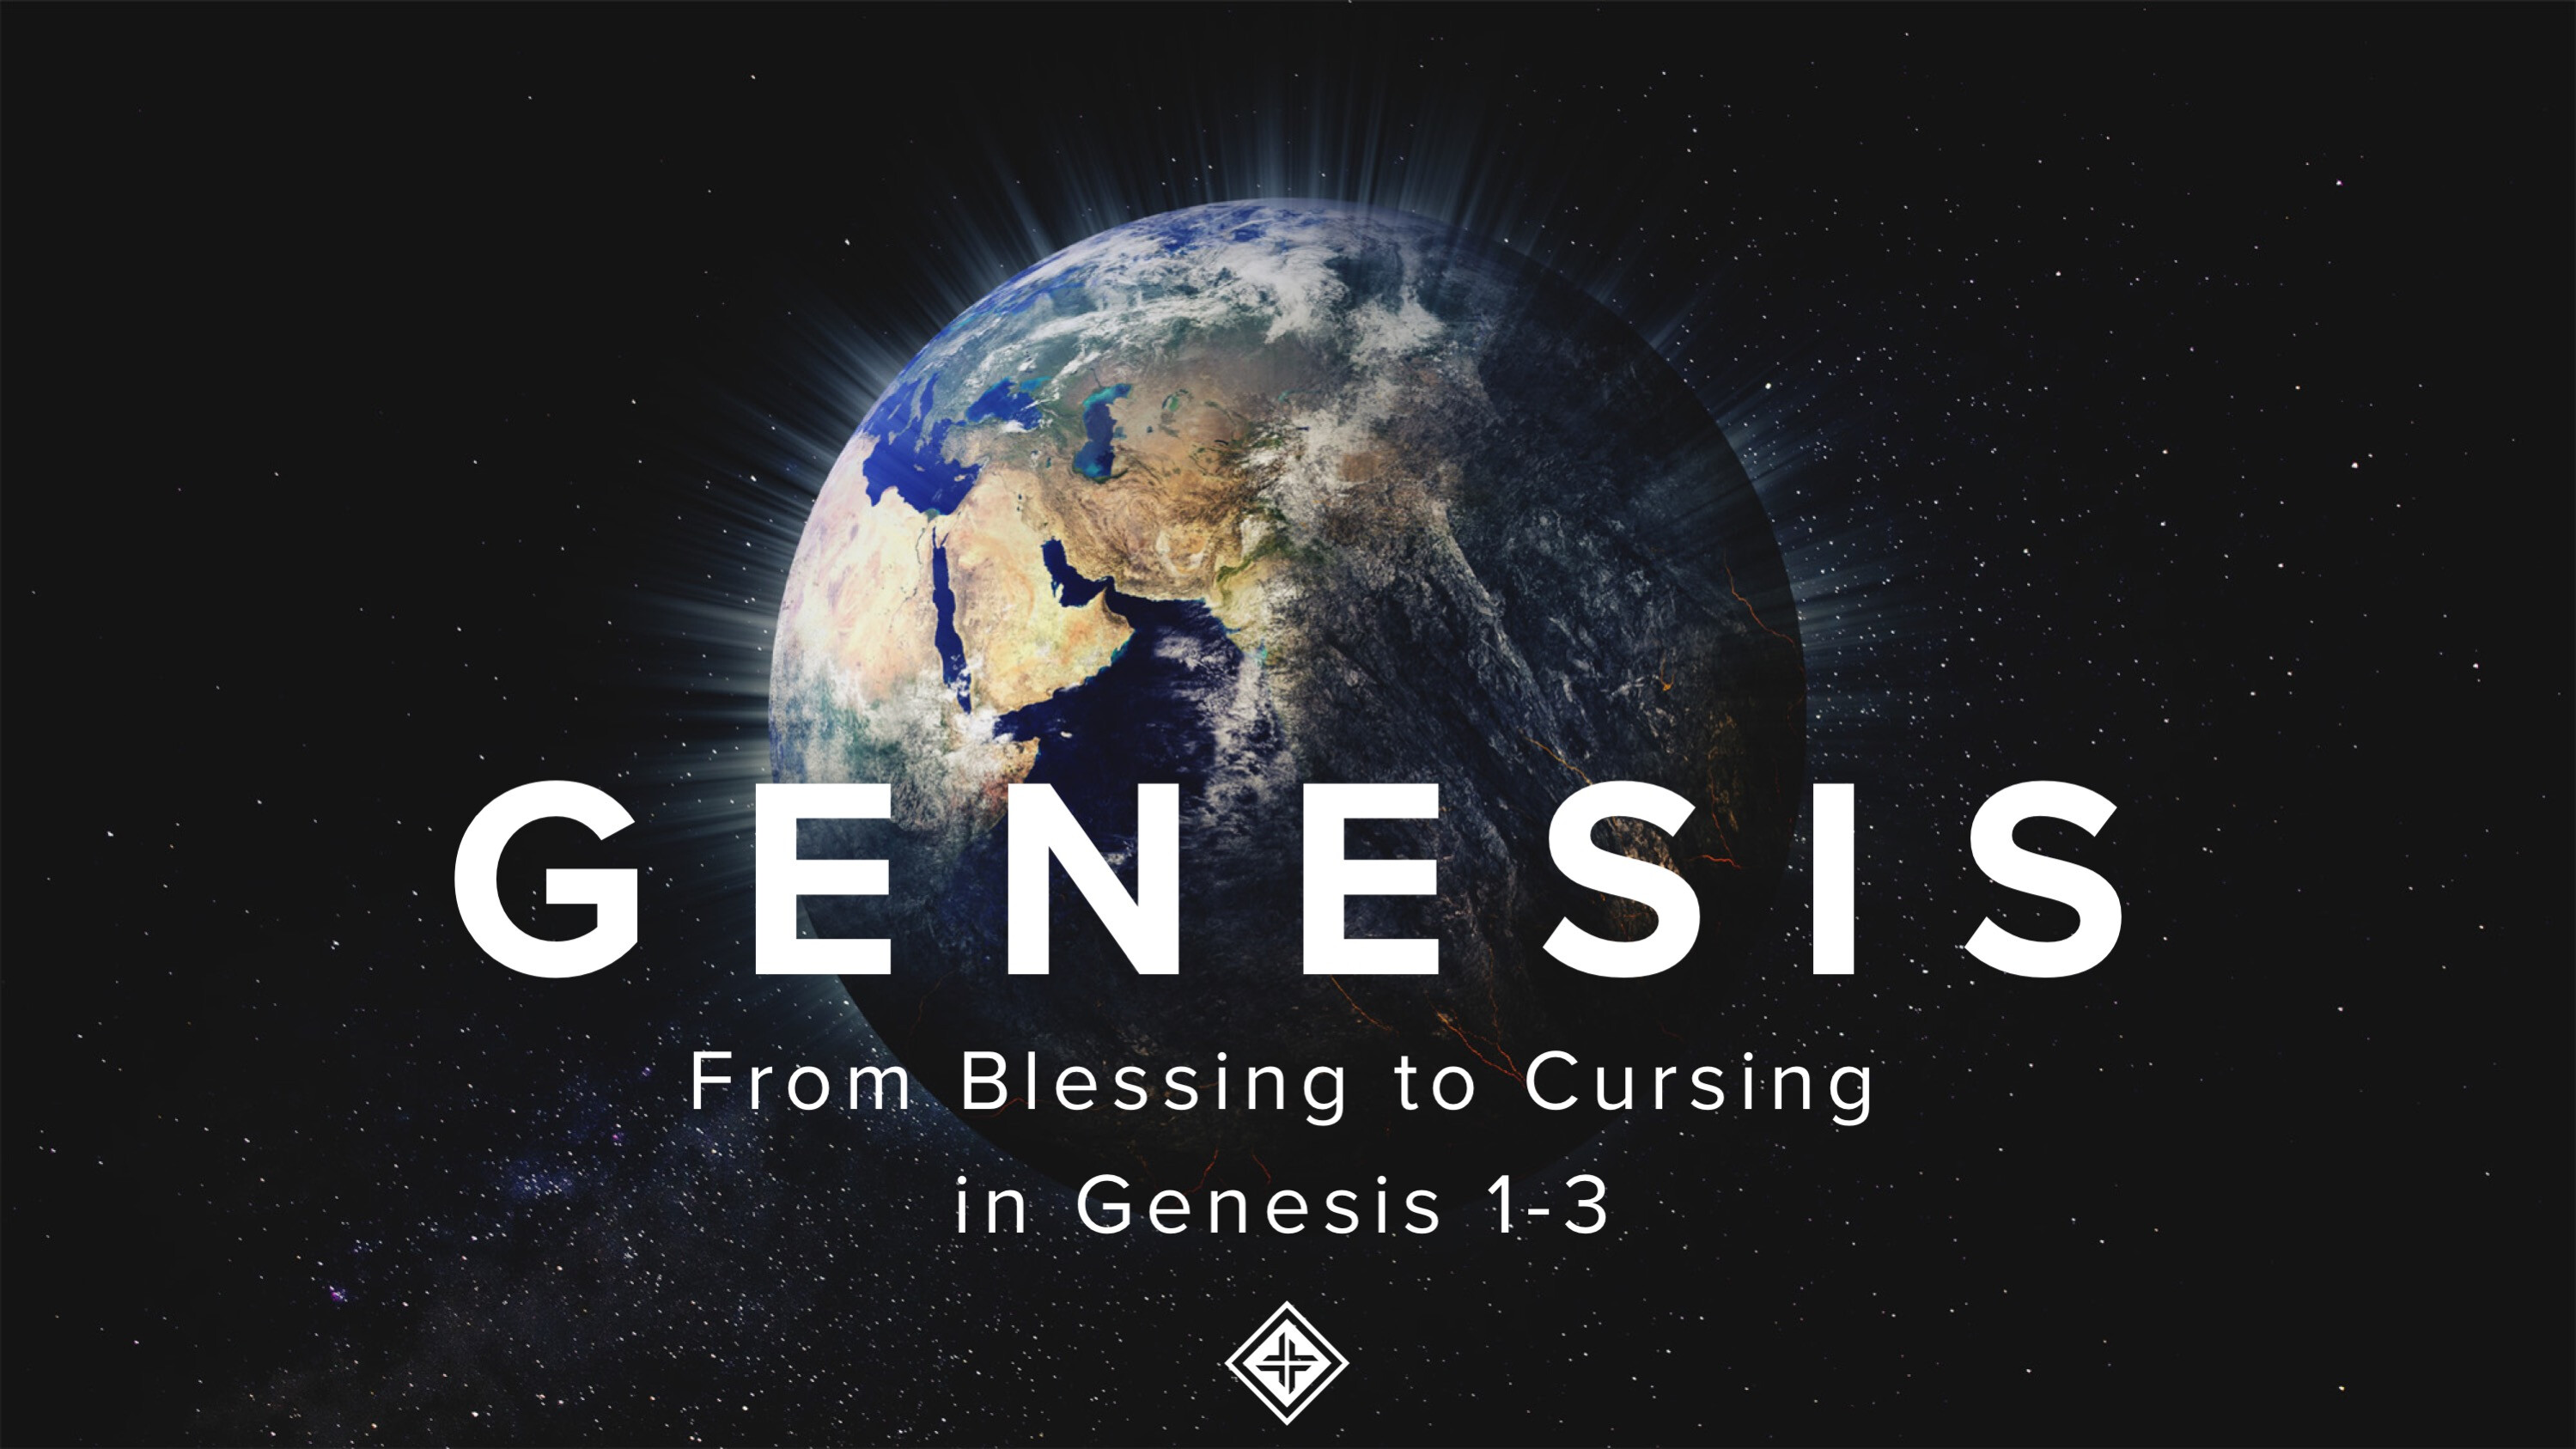 Genesis: From Blessing to Cursing